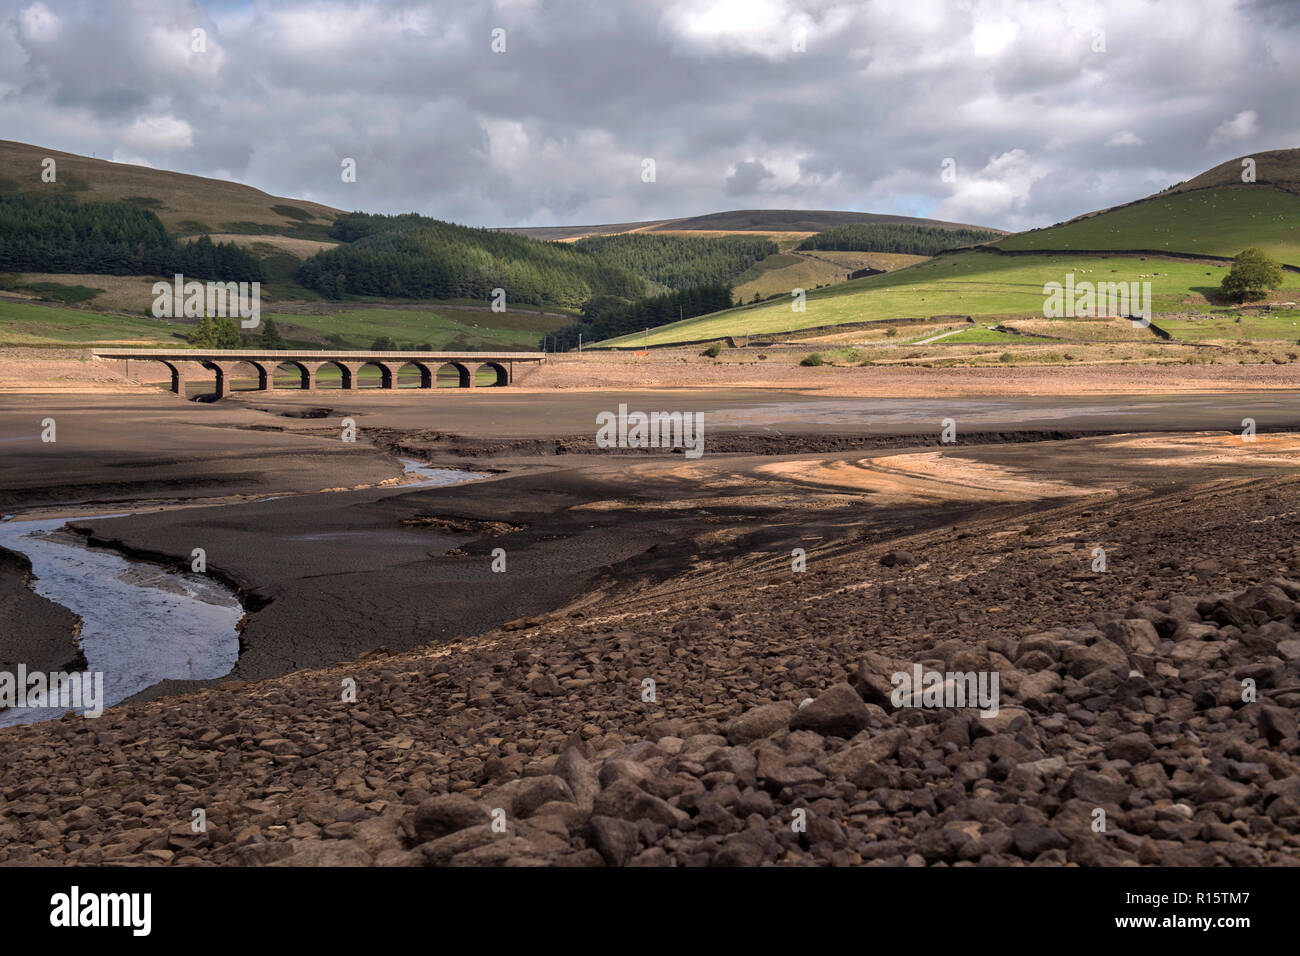 General view of extremely low water levels in Woodhead Reservoir, part of the Longdendale Reservoir system in the High Peak District Stock Photo